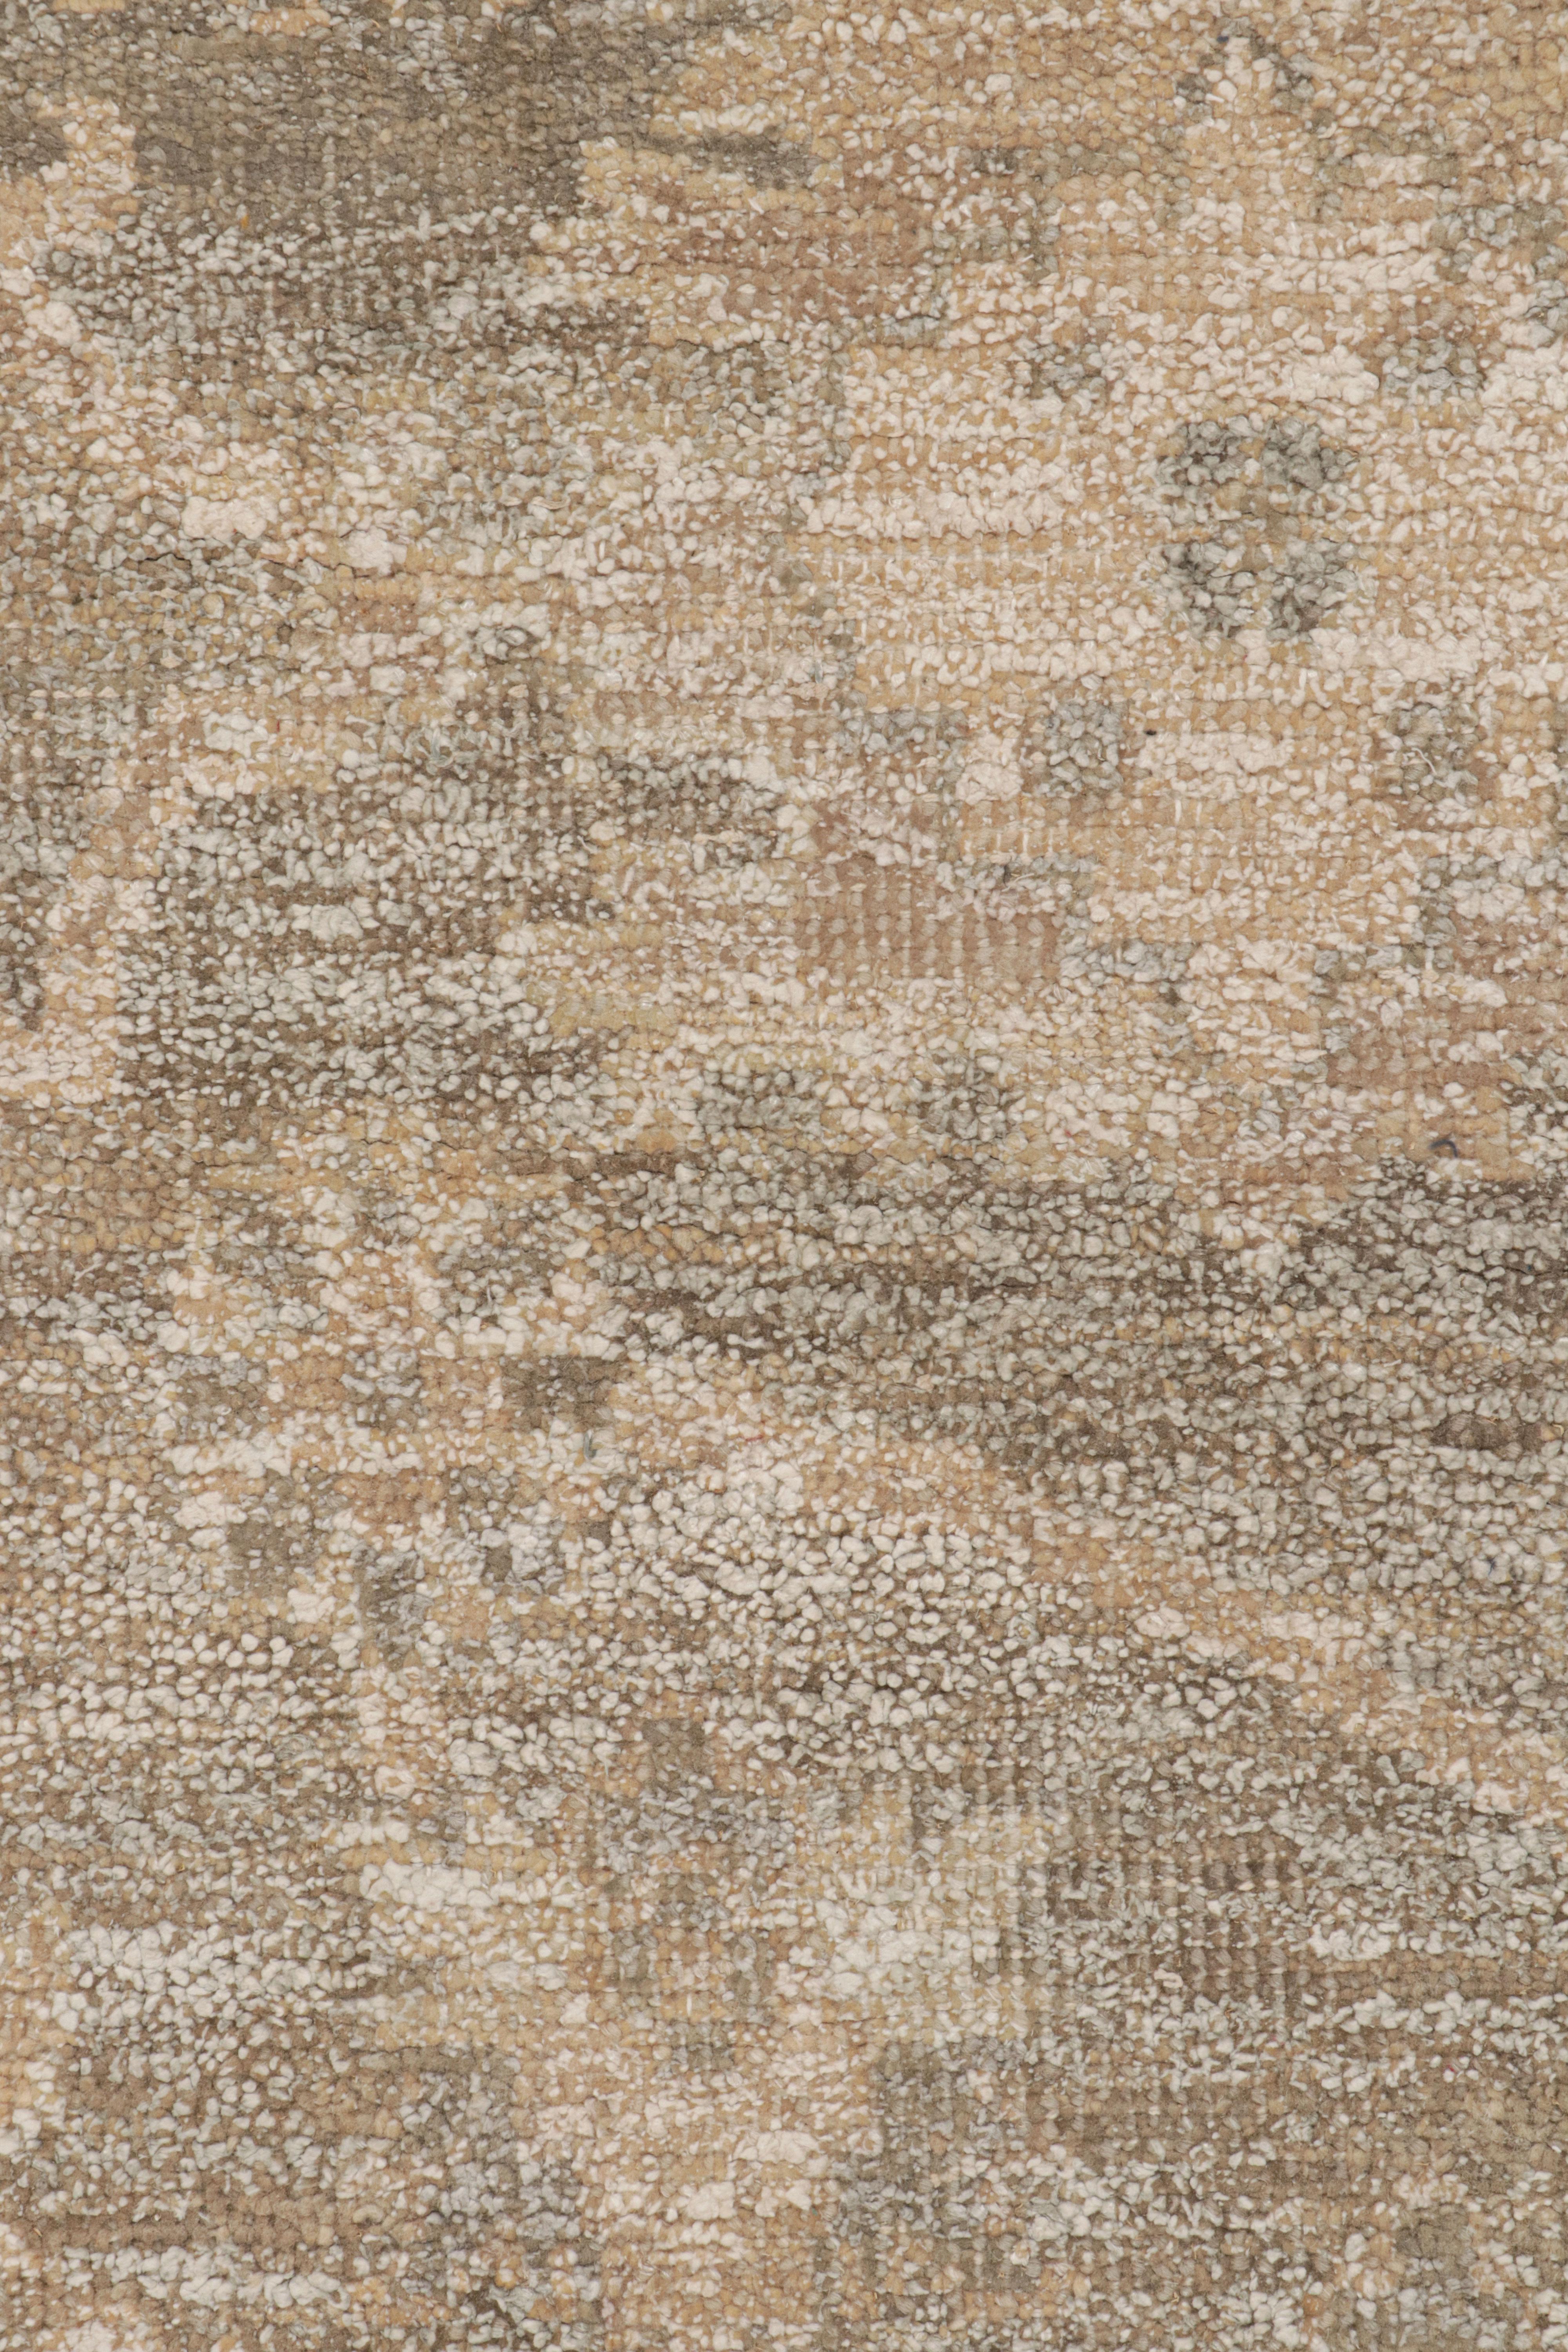 Contemporary Rug & Kilim’s Oushak Style Rug in Gray and Beige-Brown Floral Patterns For Sale